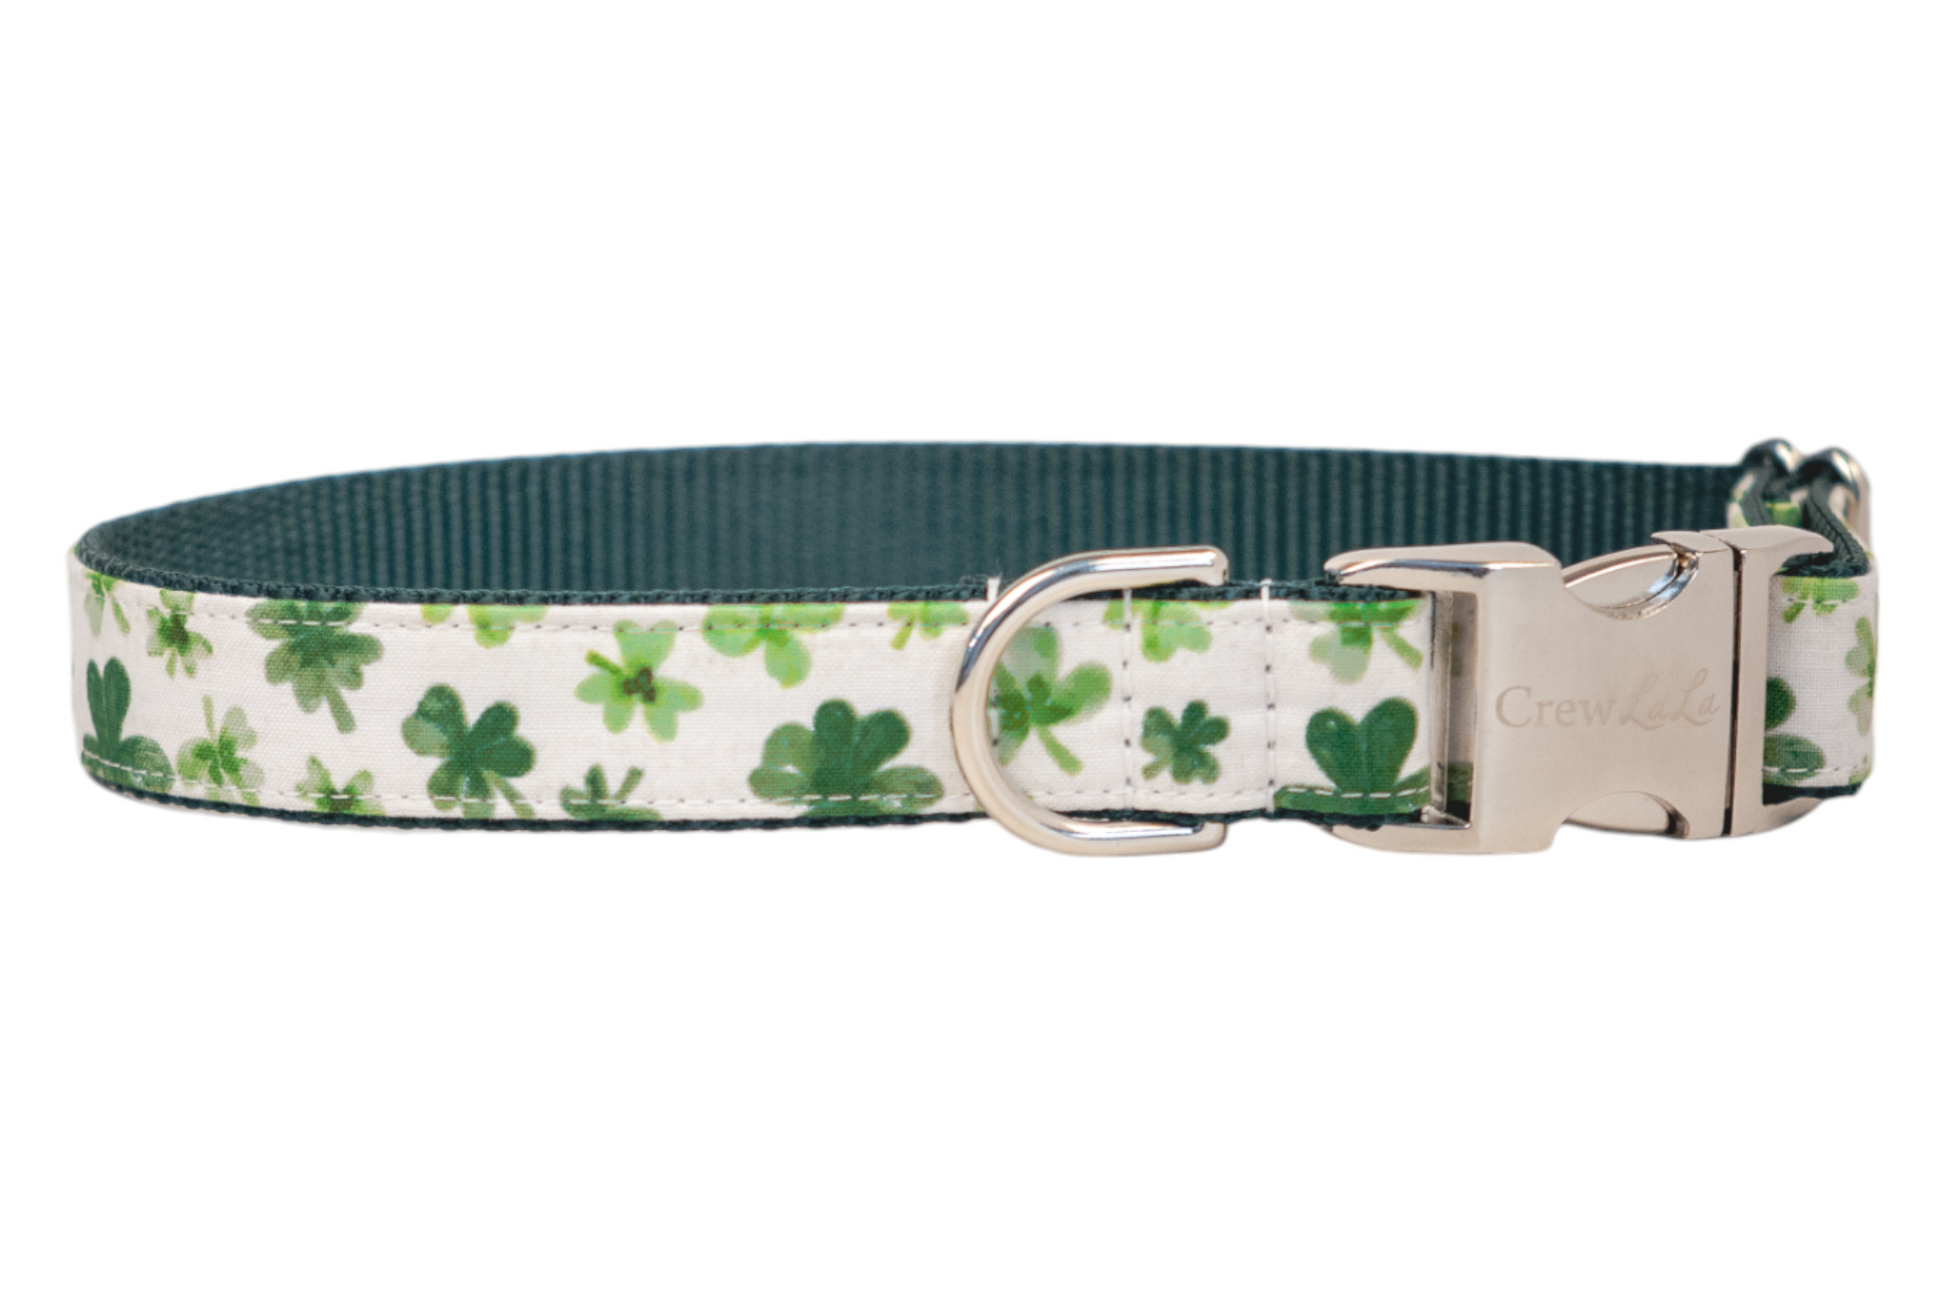 Paddy Party Bow Tie Dog Collar - Crew LaLa